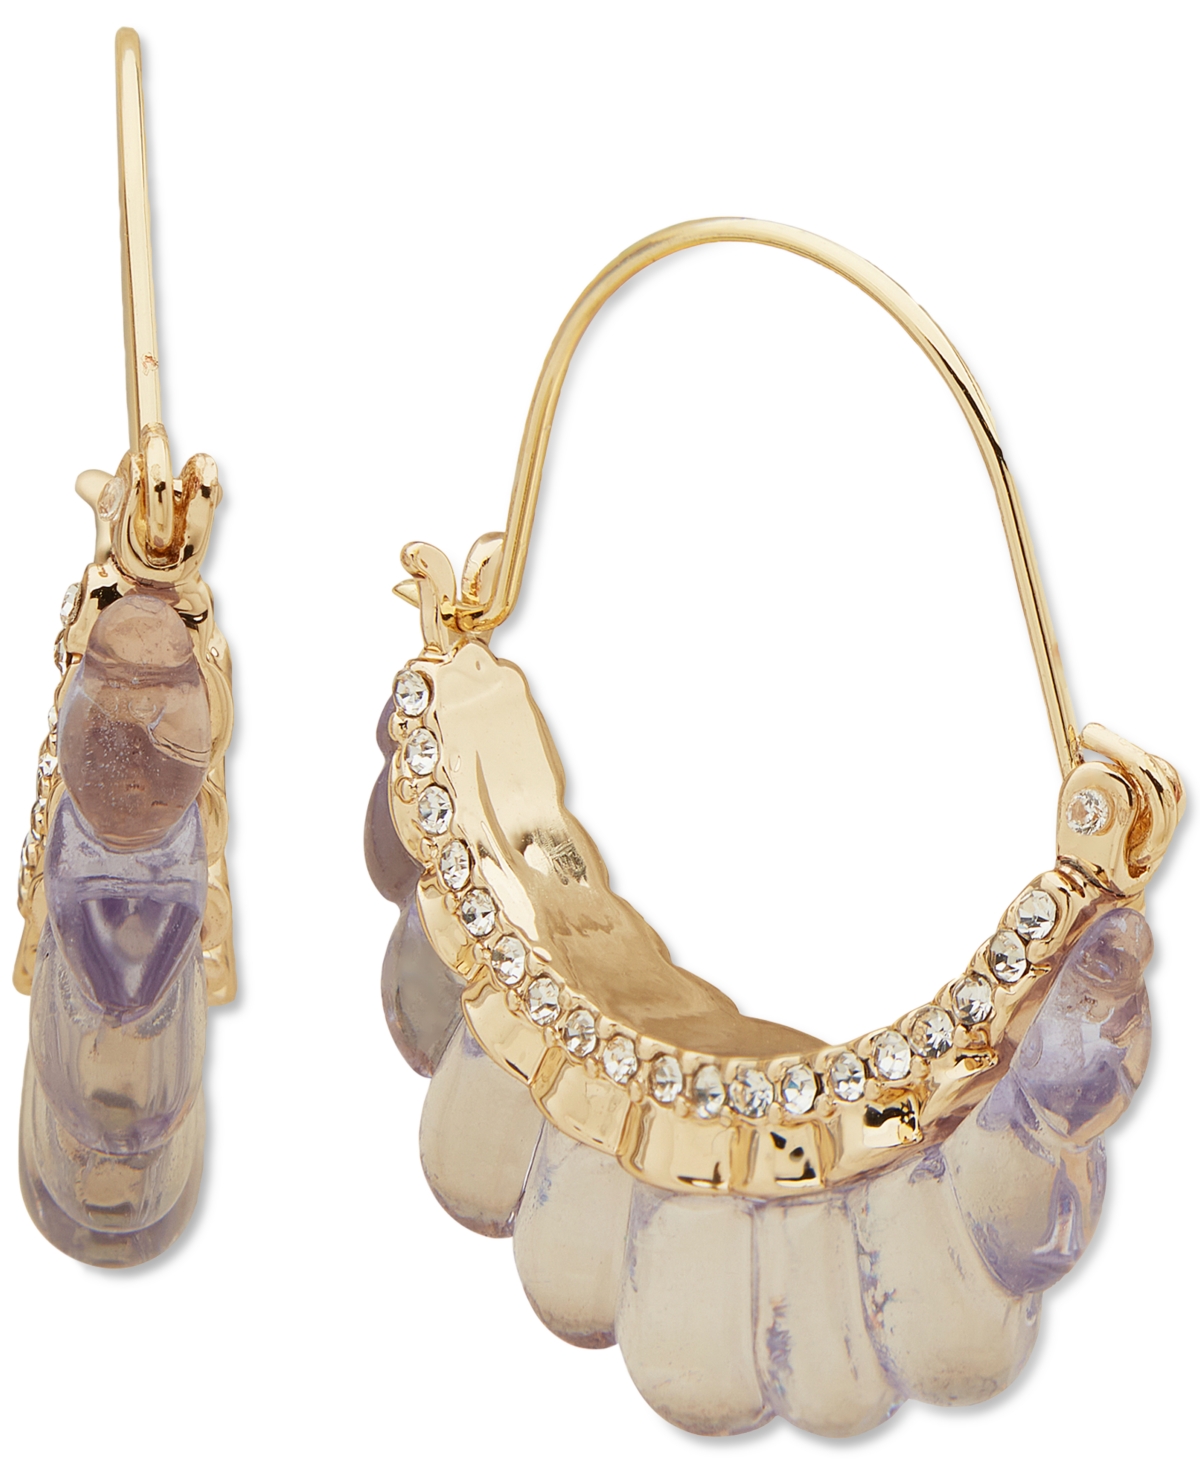 Gold-Tone Pave & Fluted Stone Hoop Earrings - Purple